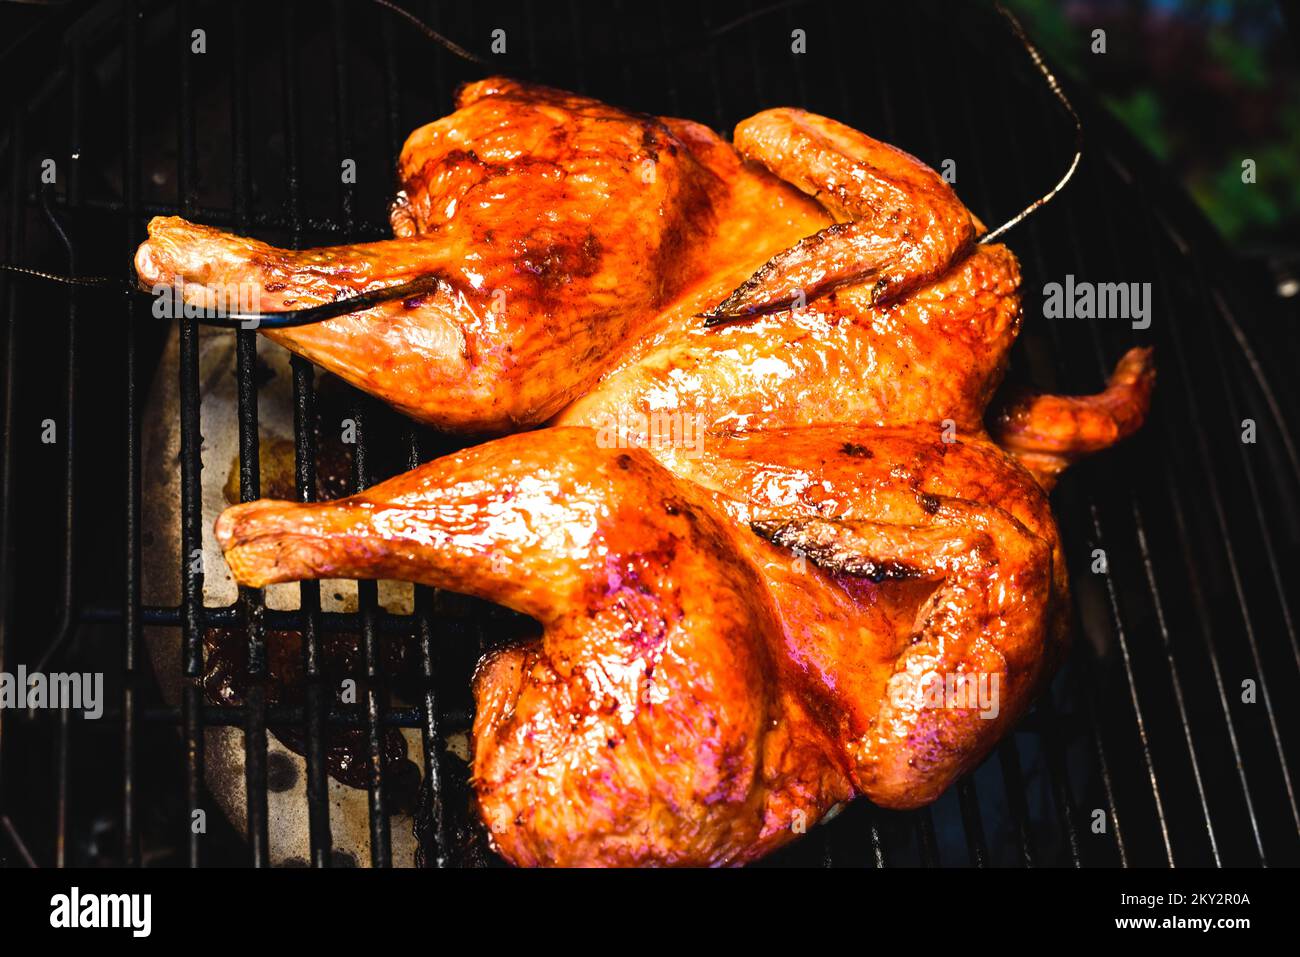 Barbeque cooked whole chicken. BBQ chicken. Whole cooked chicken. Stock Photo